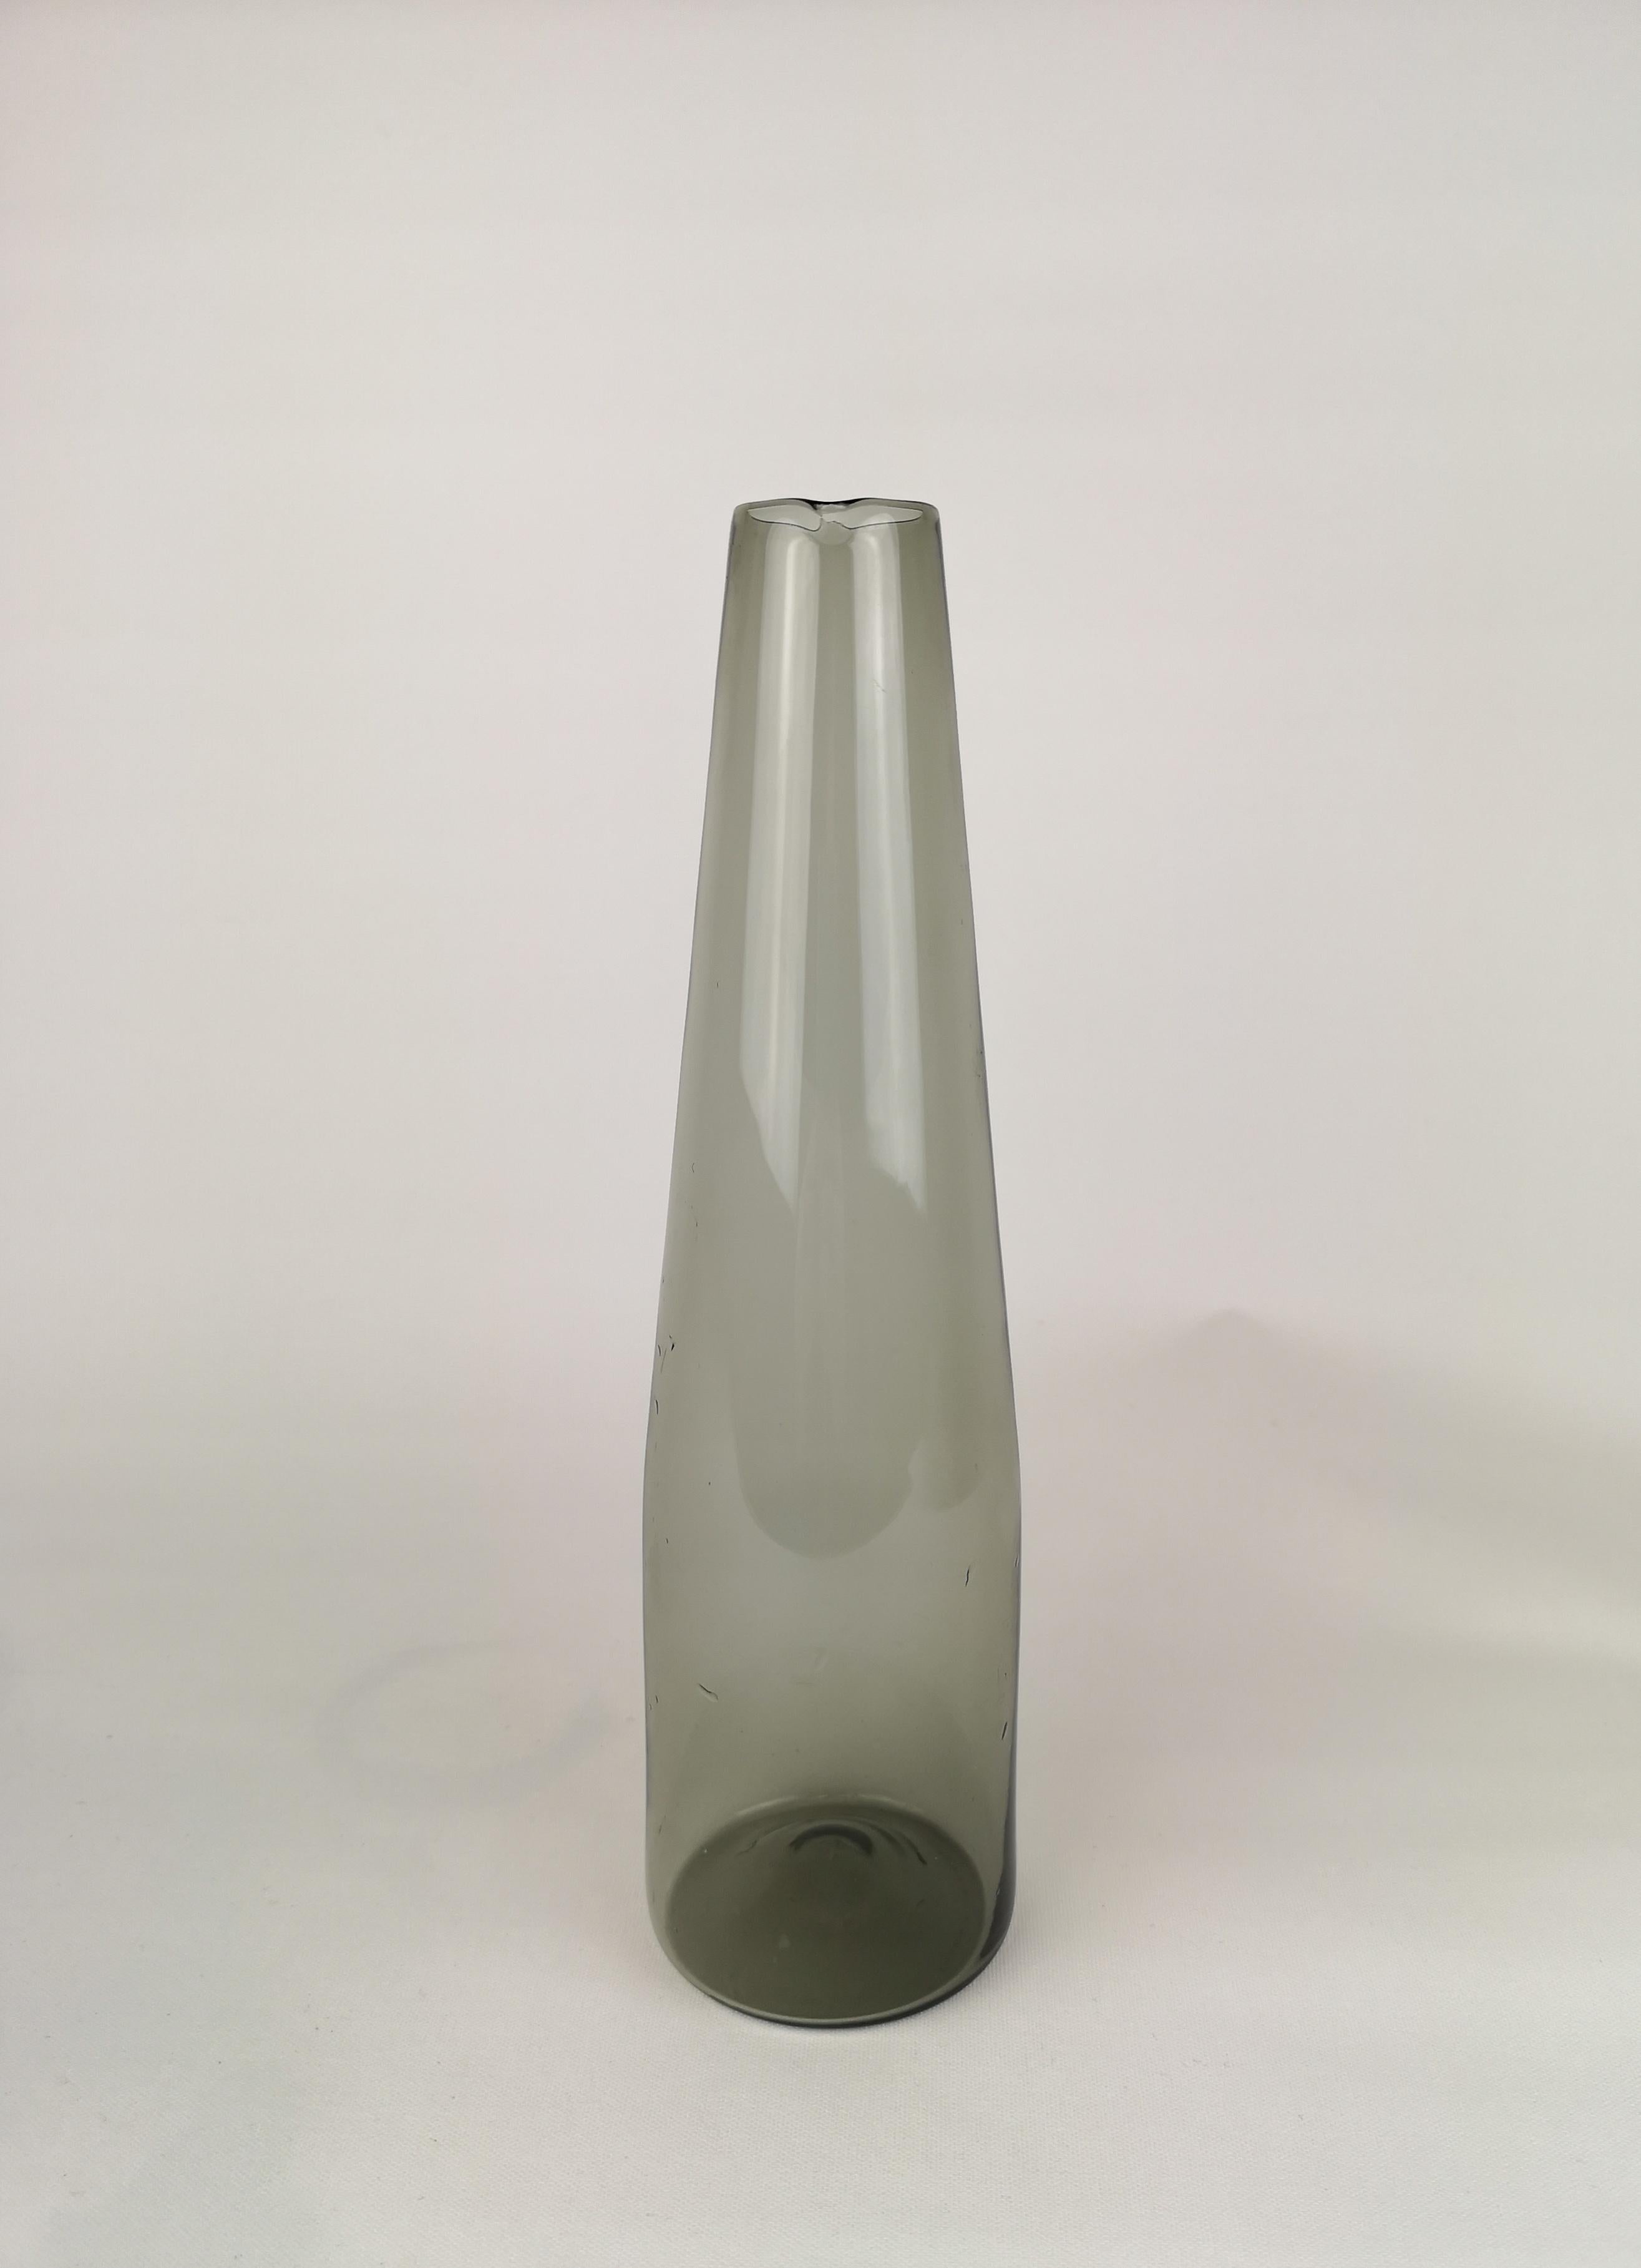 A very nice Carafe produced by Iittala in 1956-1962 and designed by Timo Sarpaneva. This one is in good condition. 

Fully signed in the bottom of the Carafe.
  